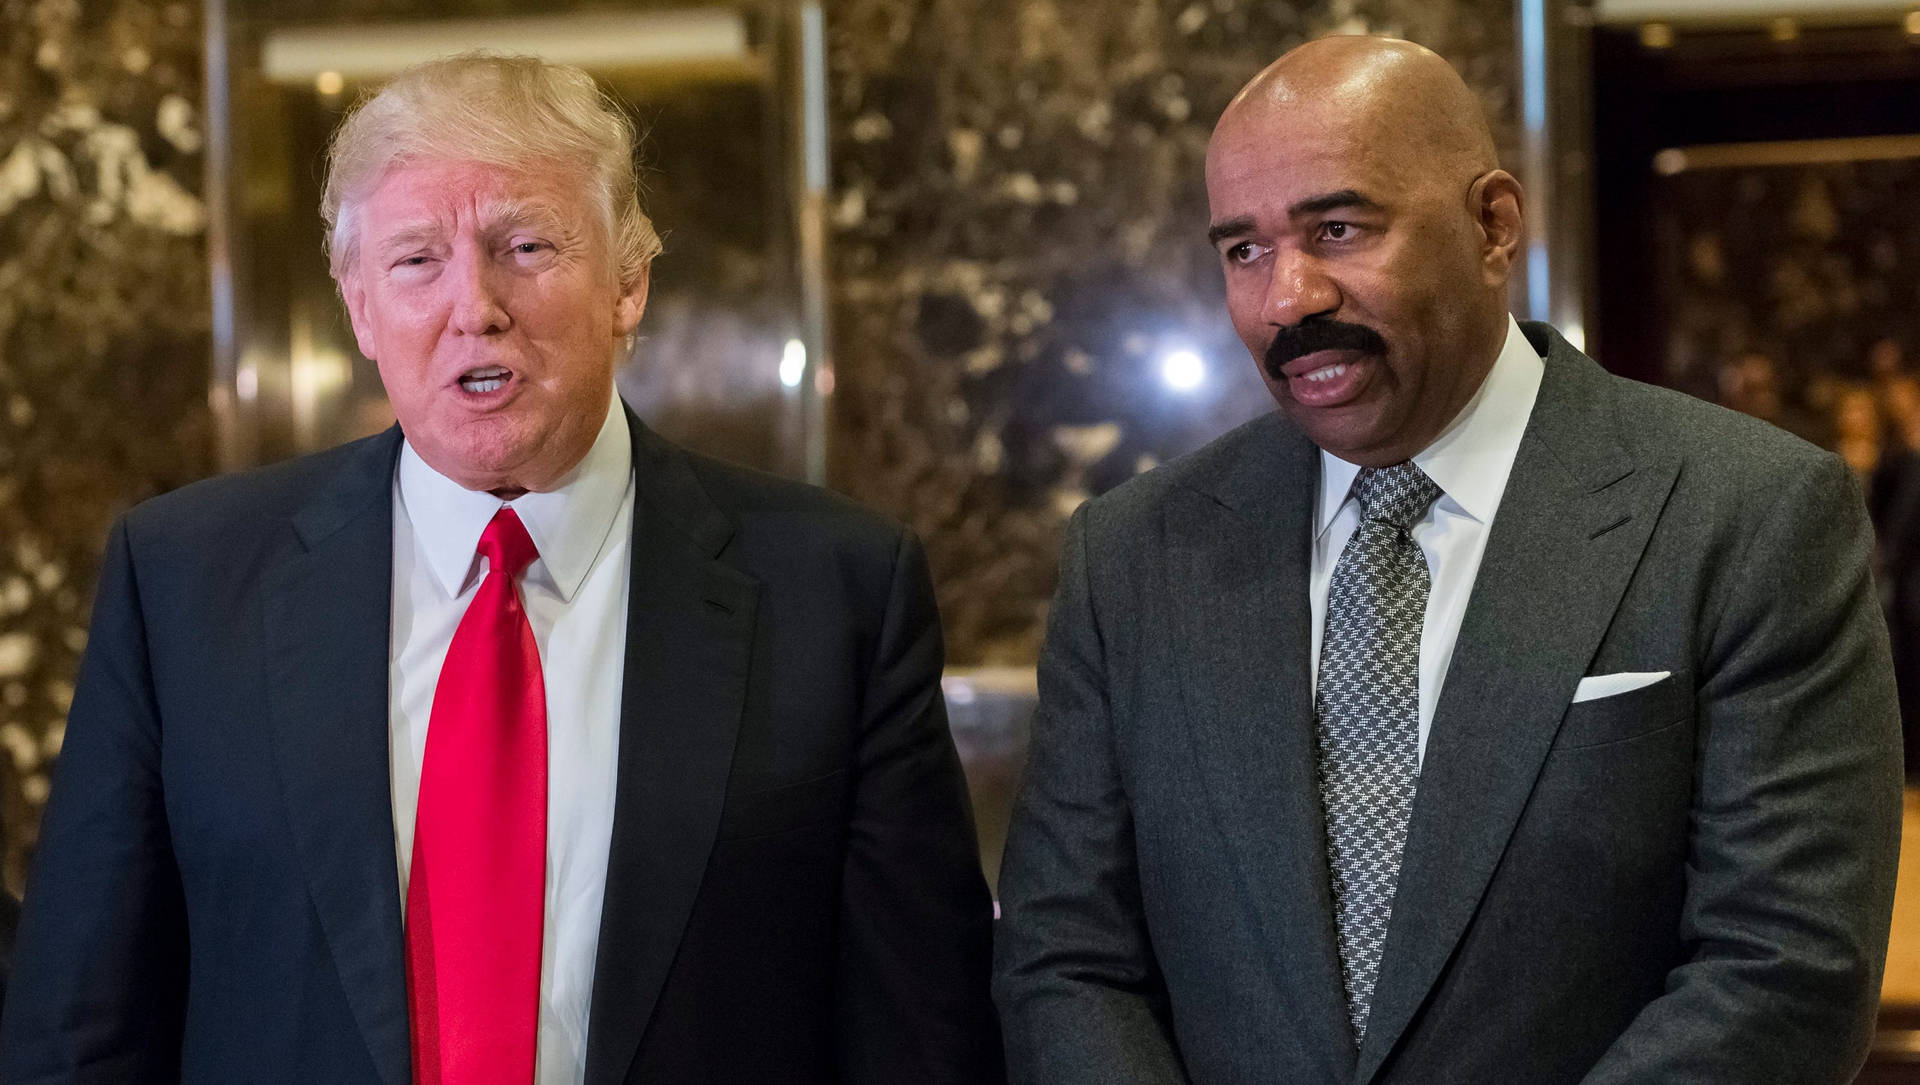 Steve Harvey Meeting With Donald Trump Background